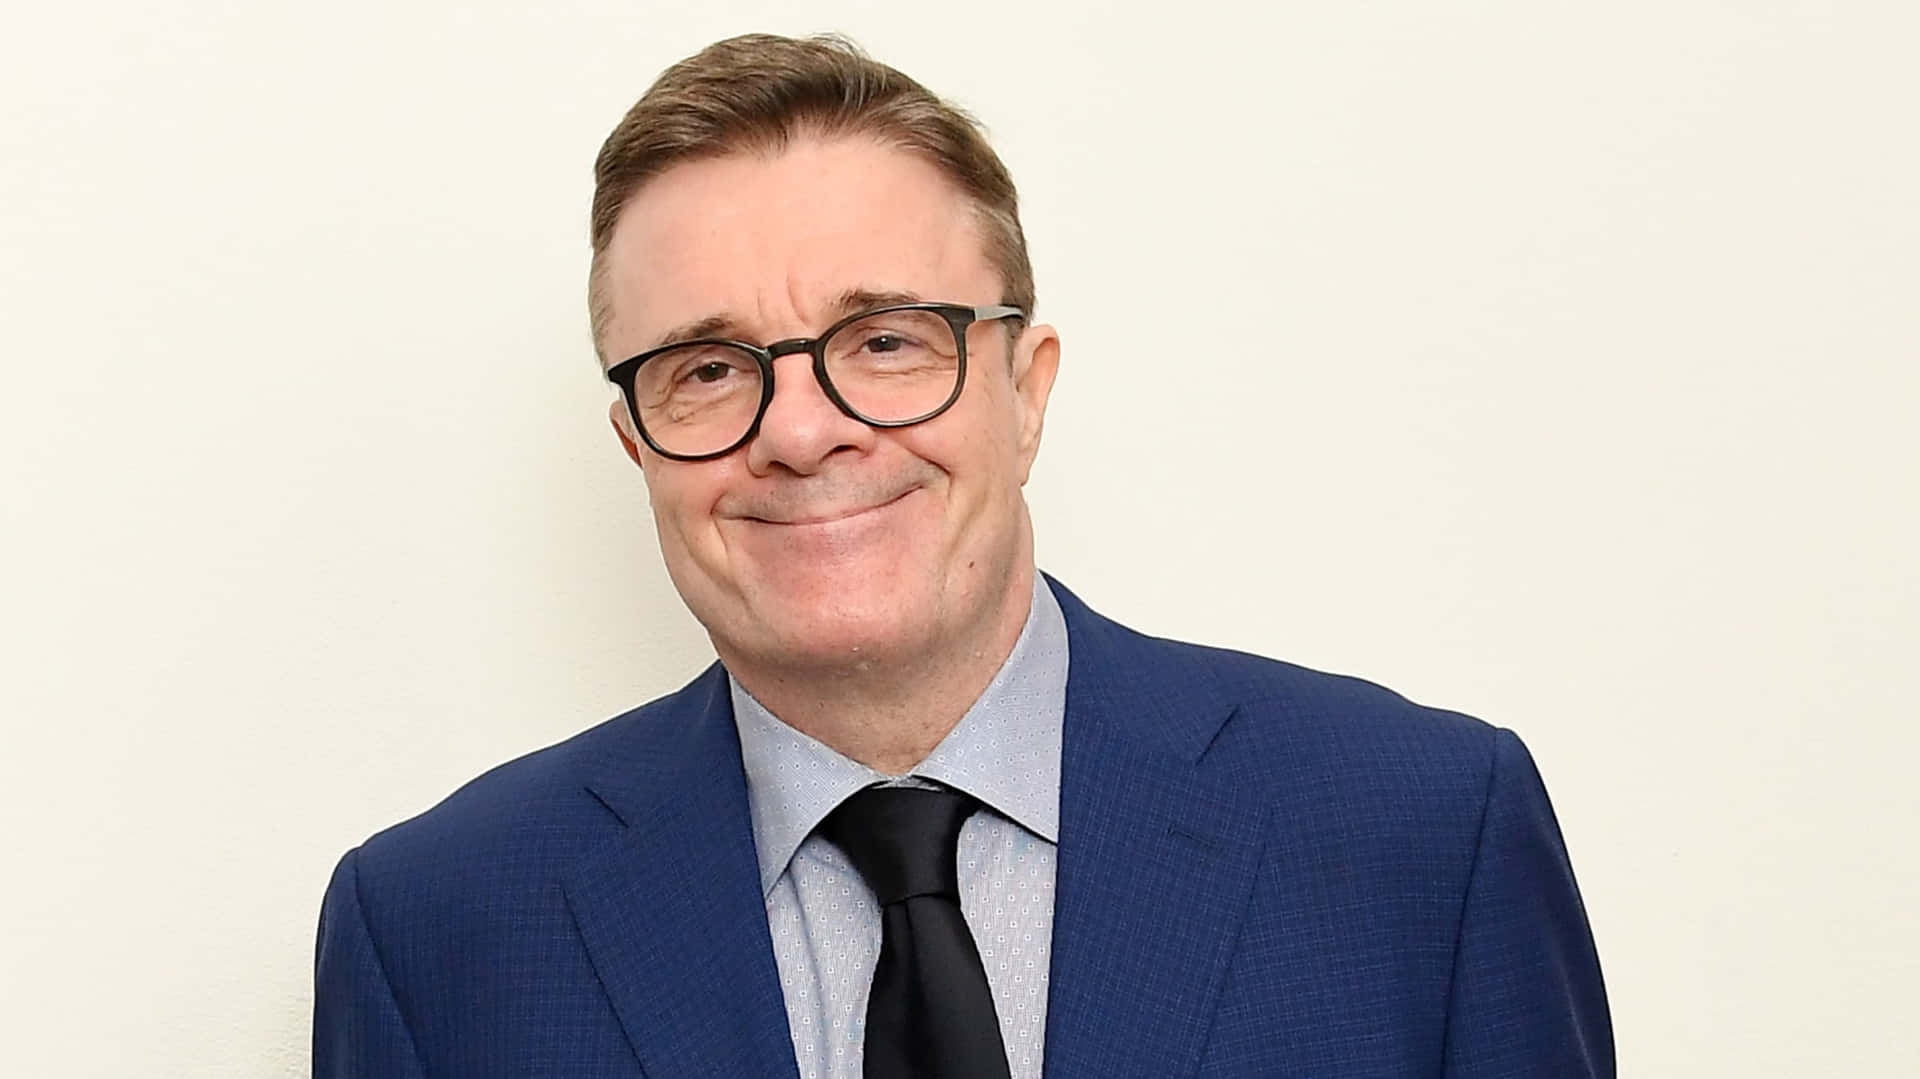 Actor Nathan Lane wearing a suit and red tie Wallpaper